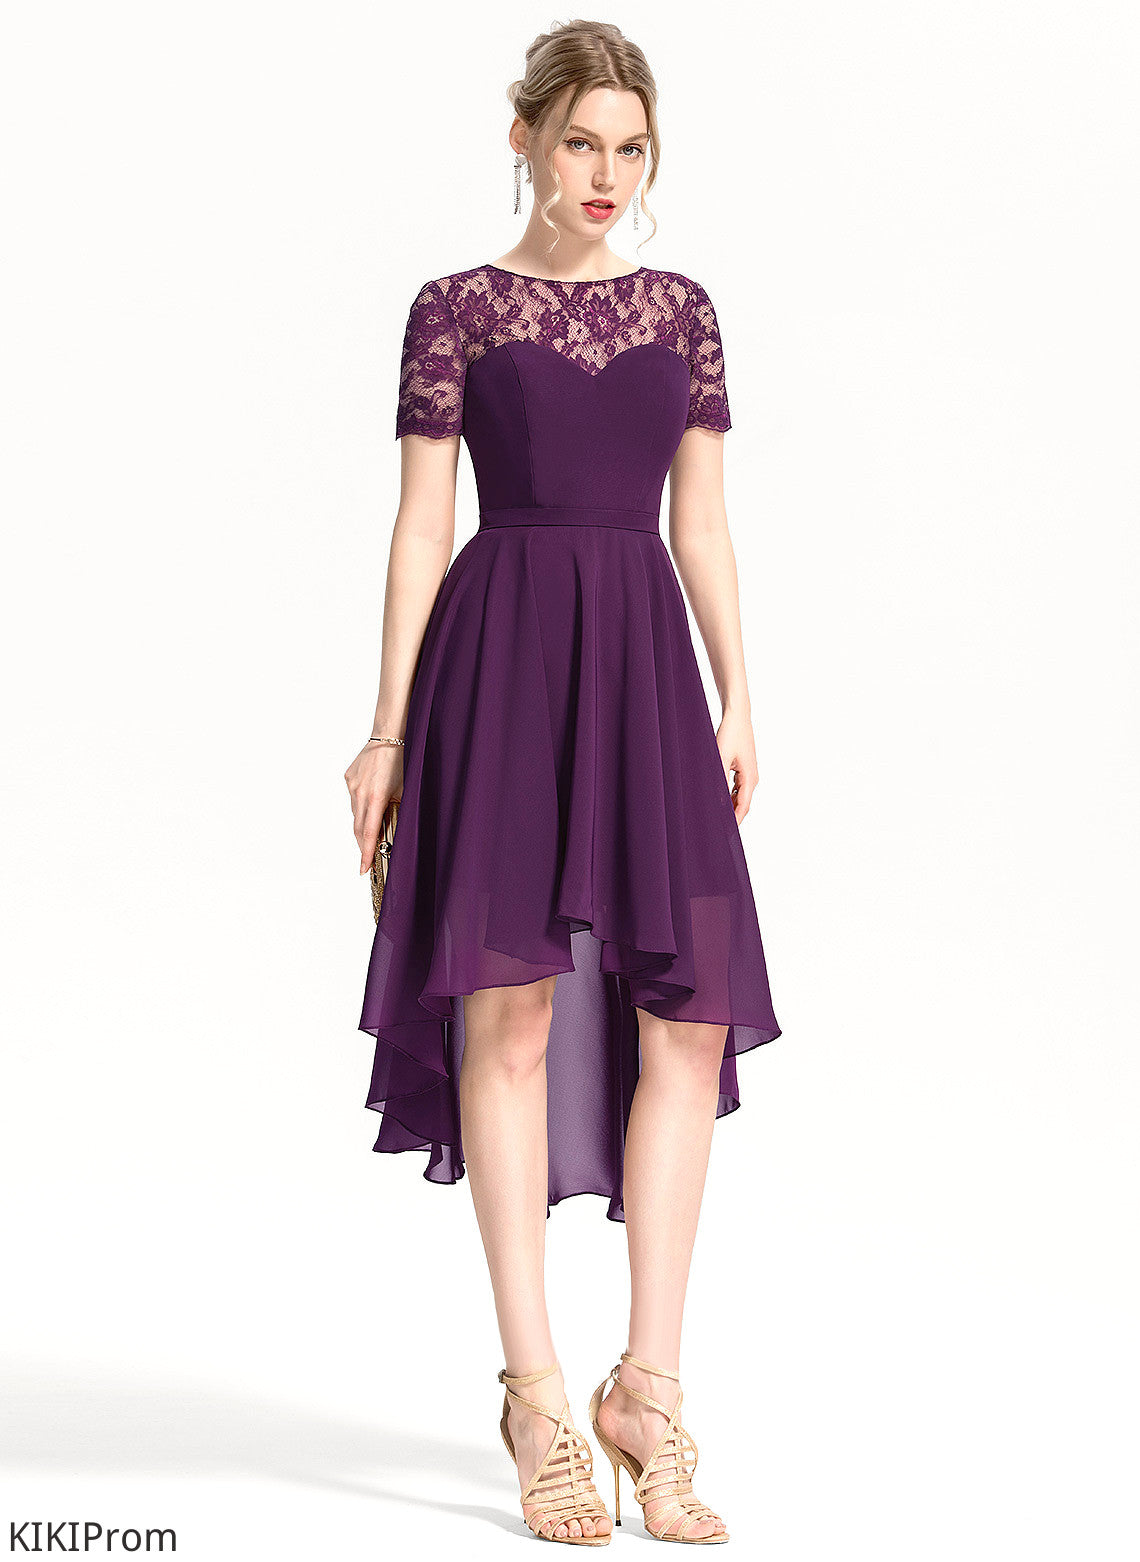 Dress Homecoming Dresses Chiffon Scoop Neck Polly Homecoming Lace With A-Line Asymmetrical